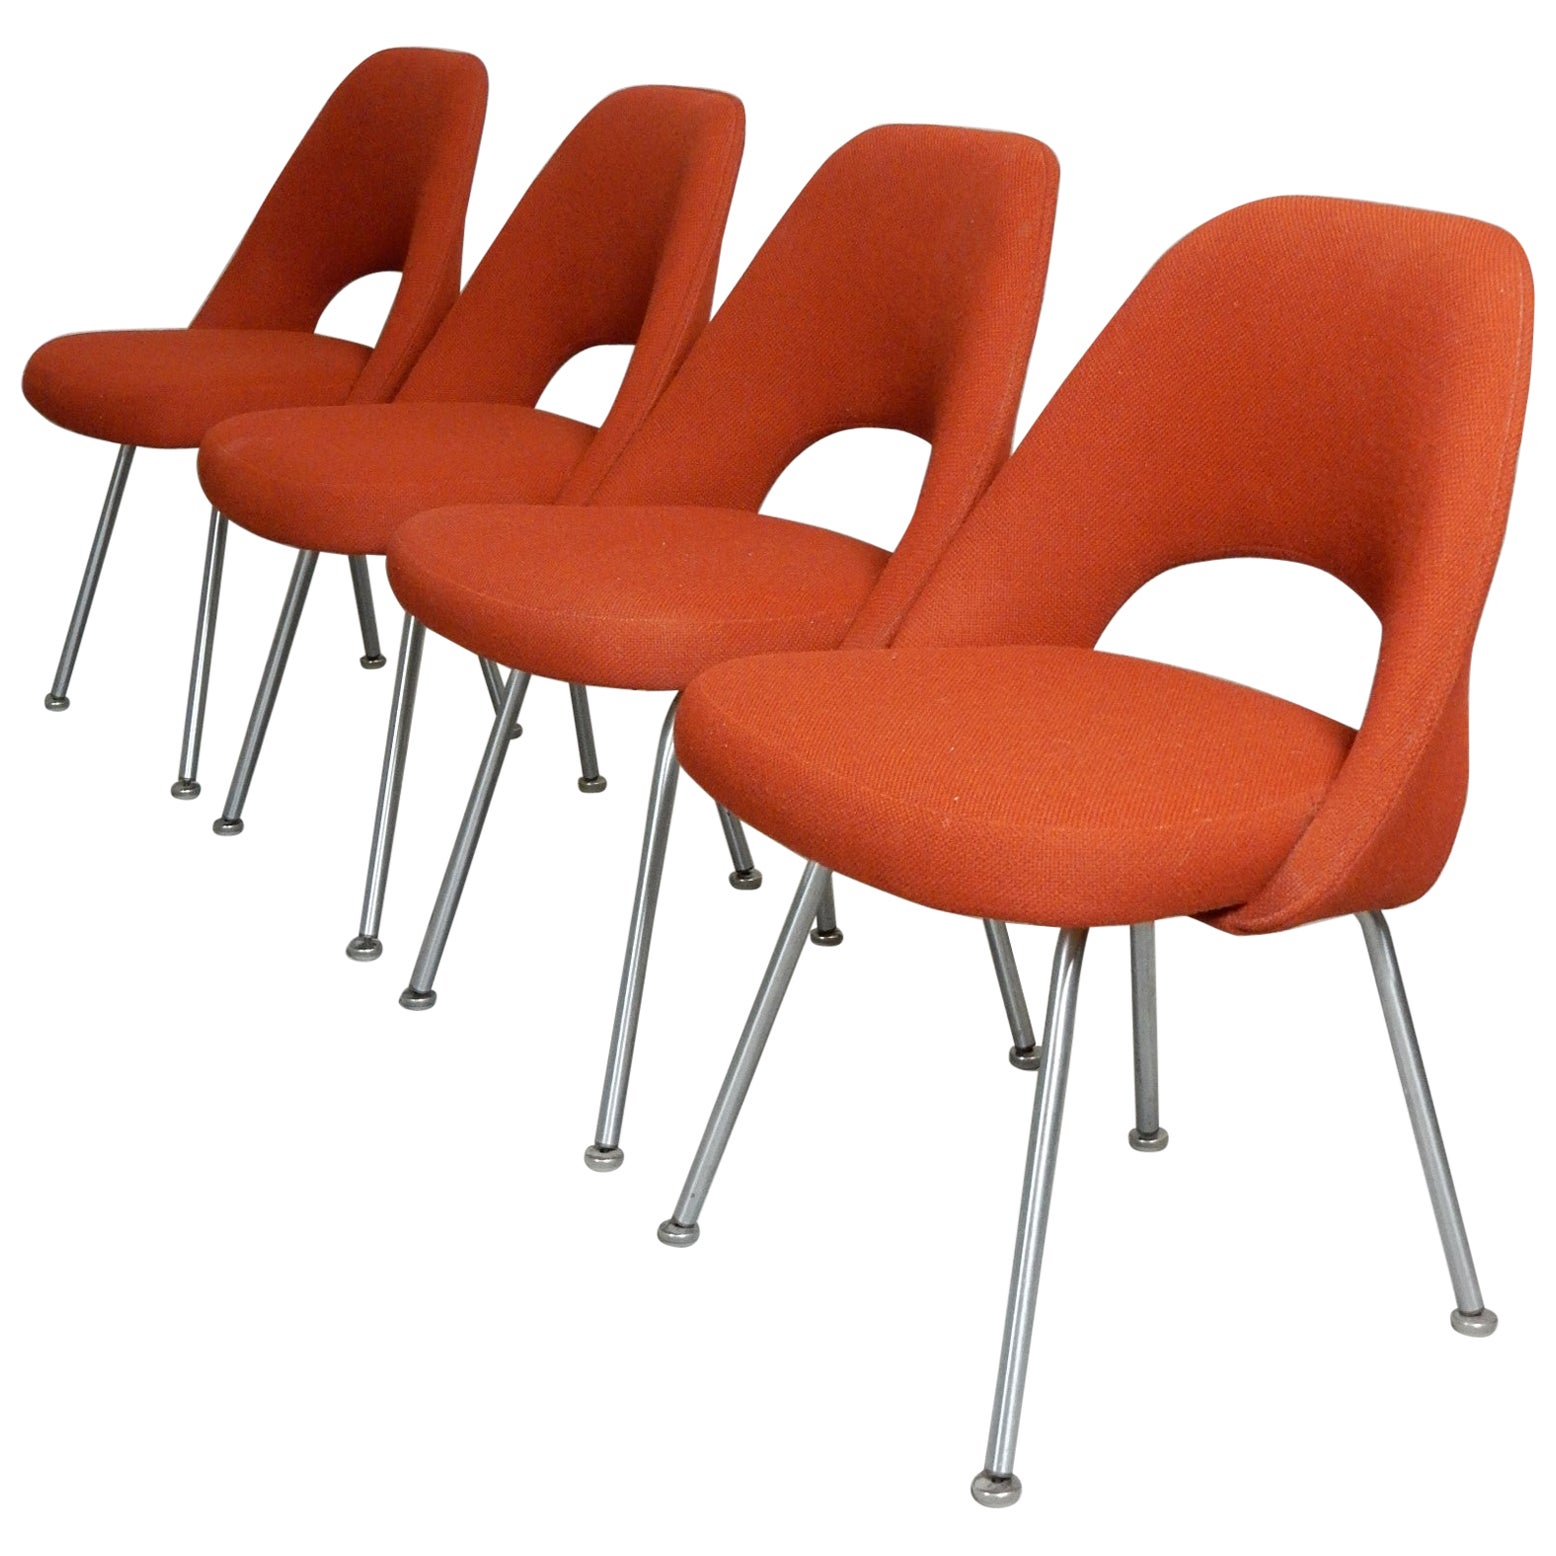 Mid-Century Saarinen for Knoll Executive Armless Chairs. set of 4, dated 1963